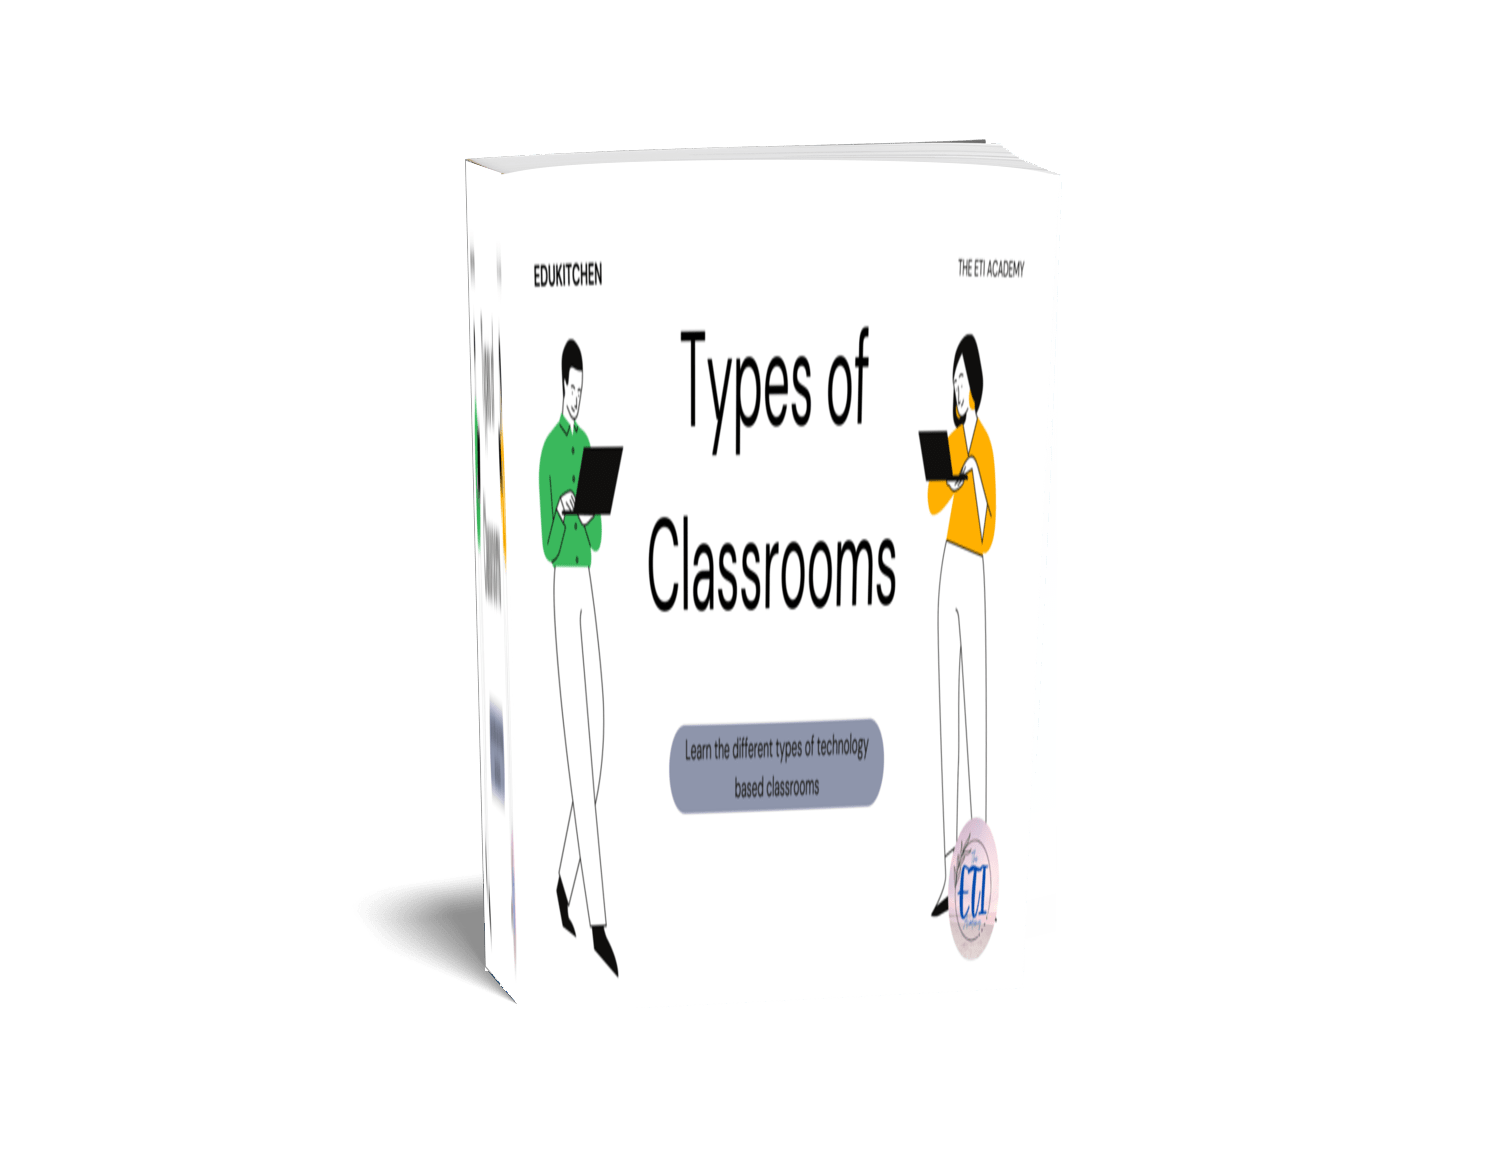 technology based classrooms